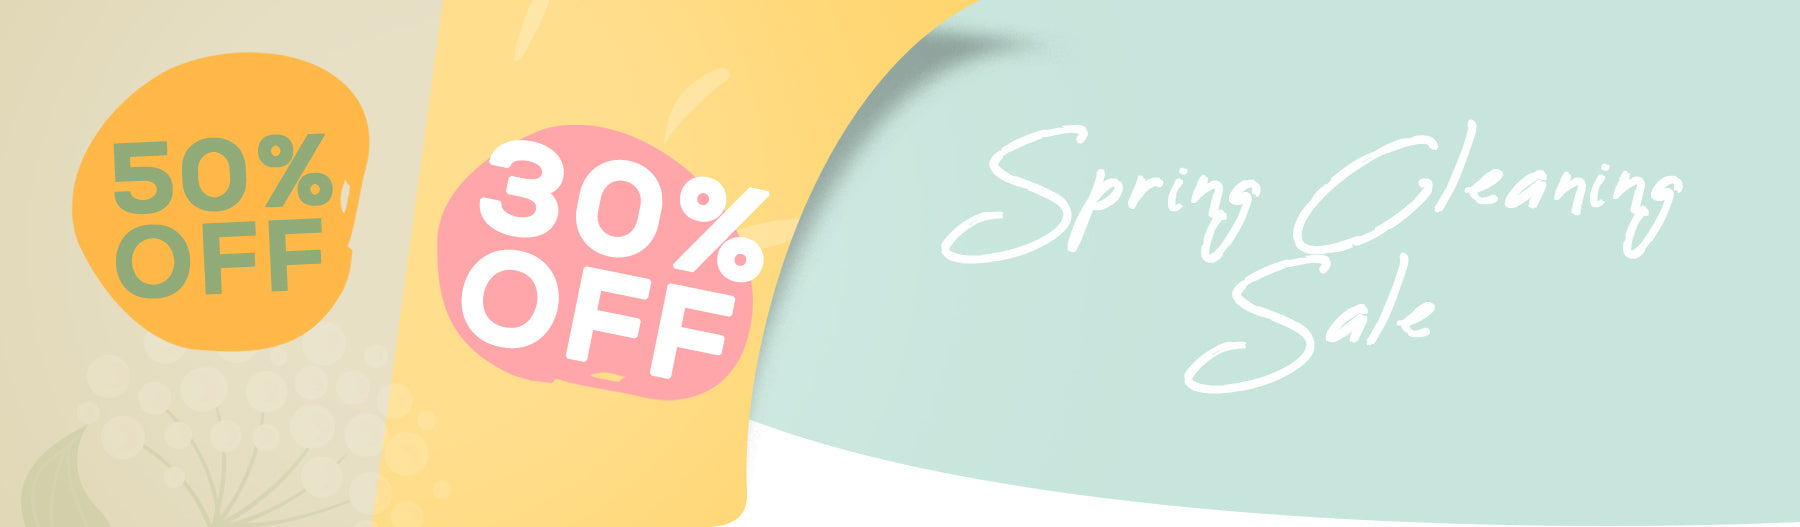 Spring Cleaning Sale Now On - Up TO 50% OFF!!